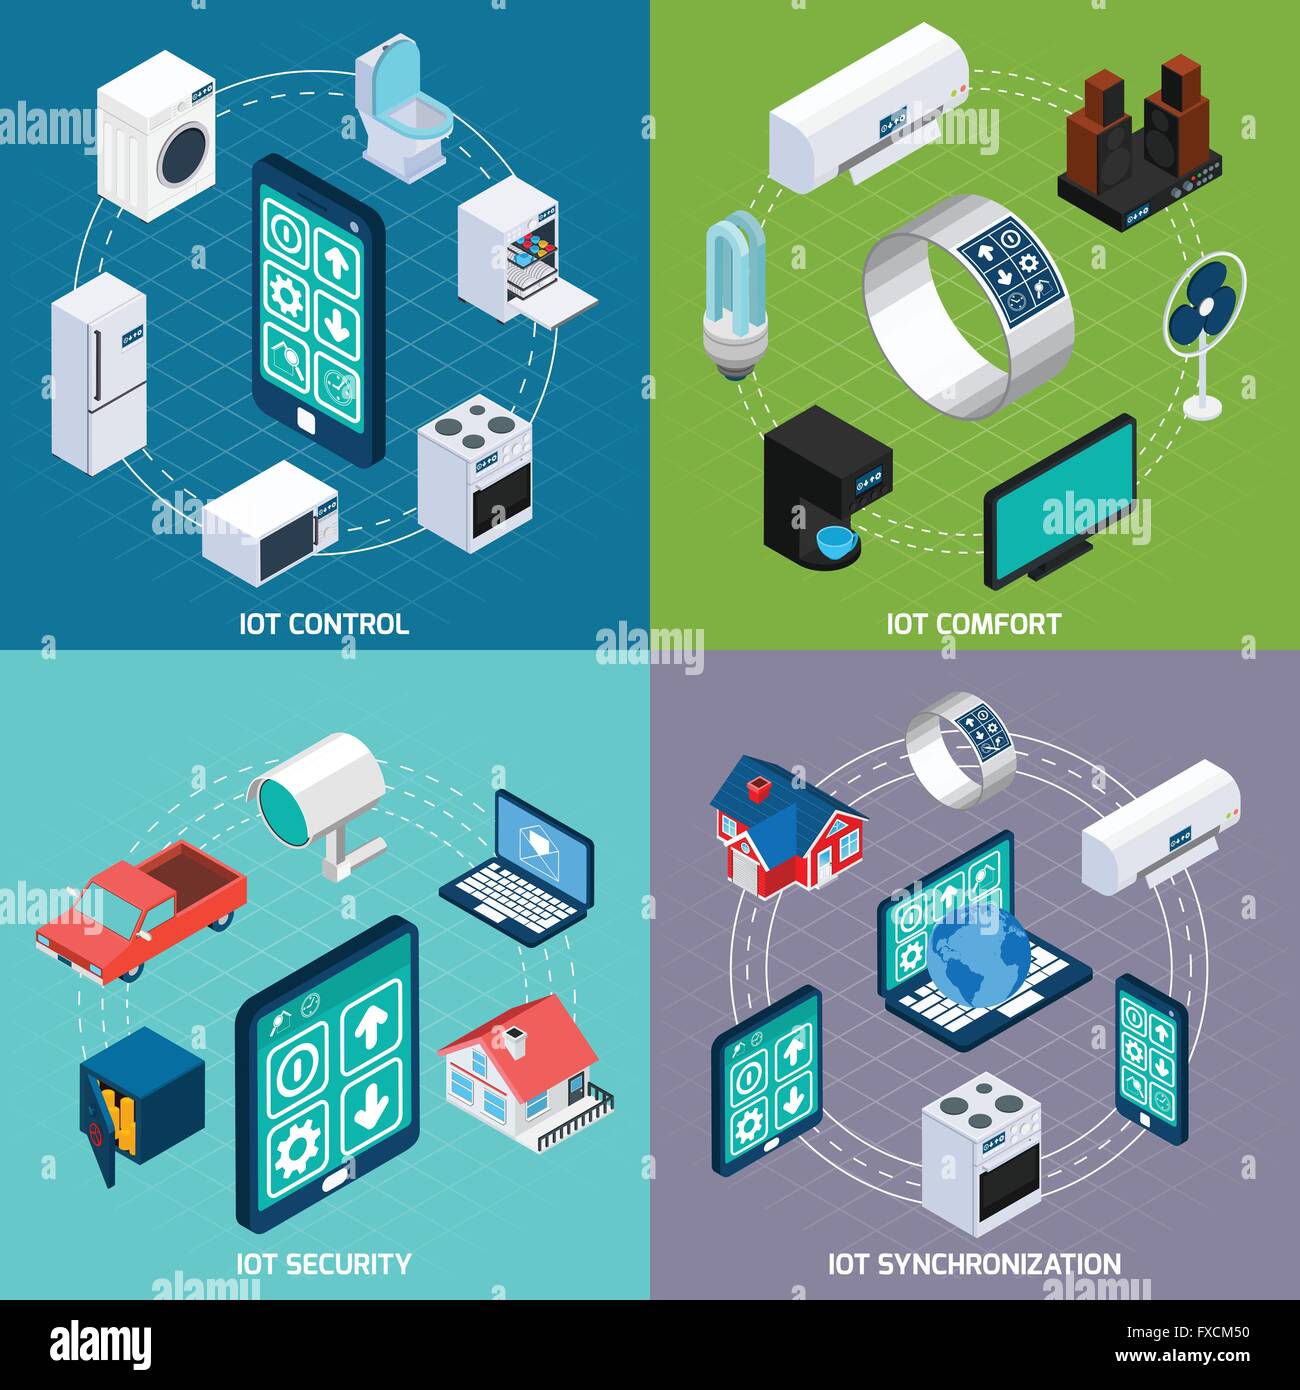 Iot 4 isometric icons square banner Stock Vector